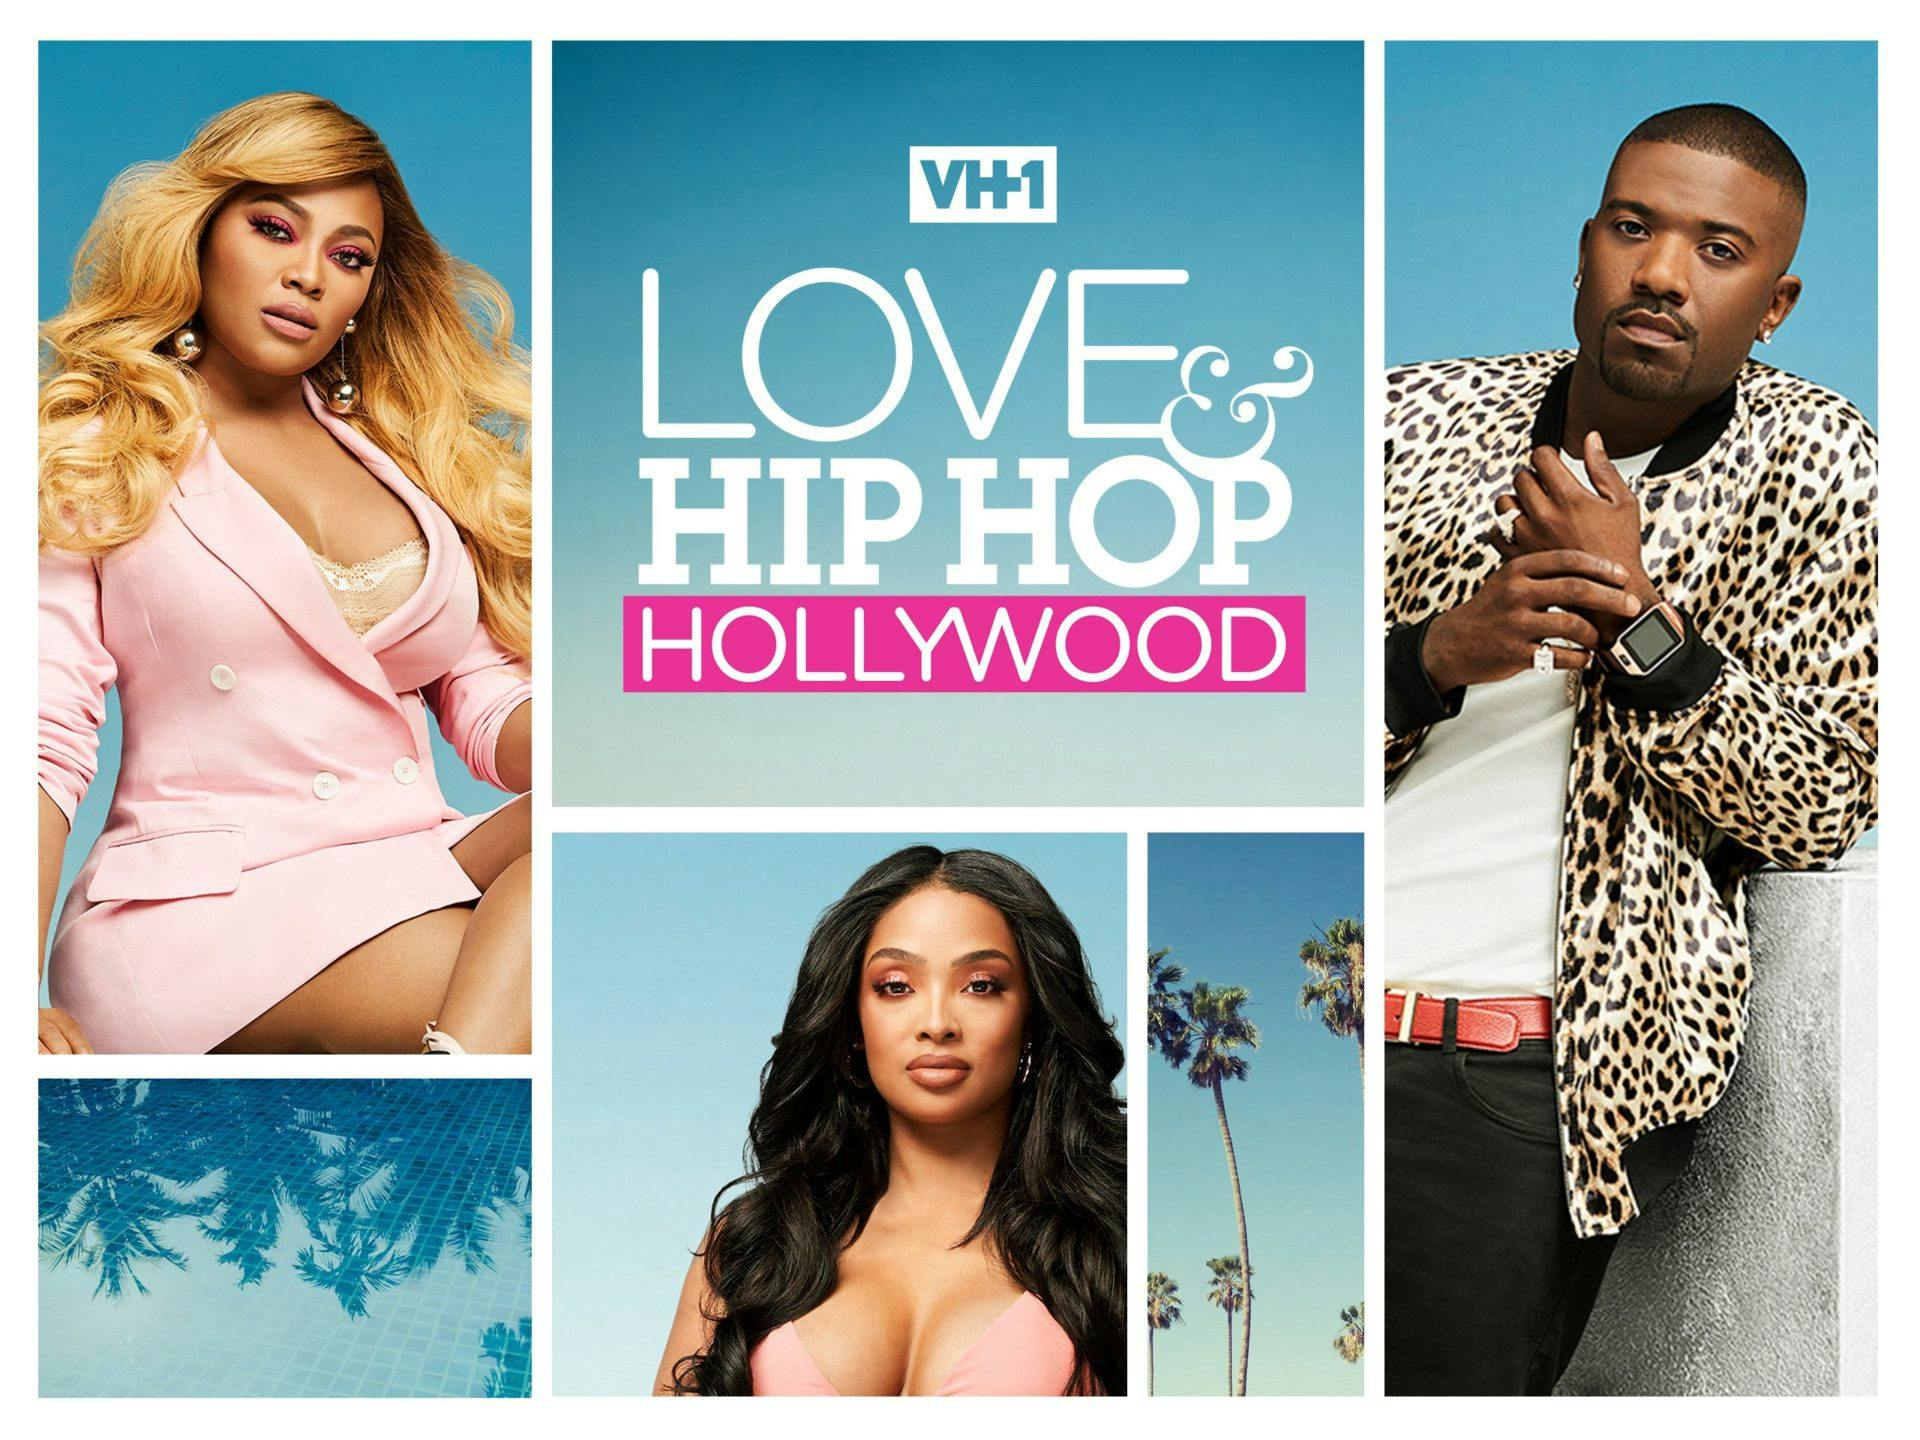 watch love and hip Hop Hollywood on Amazon